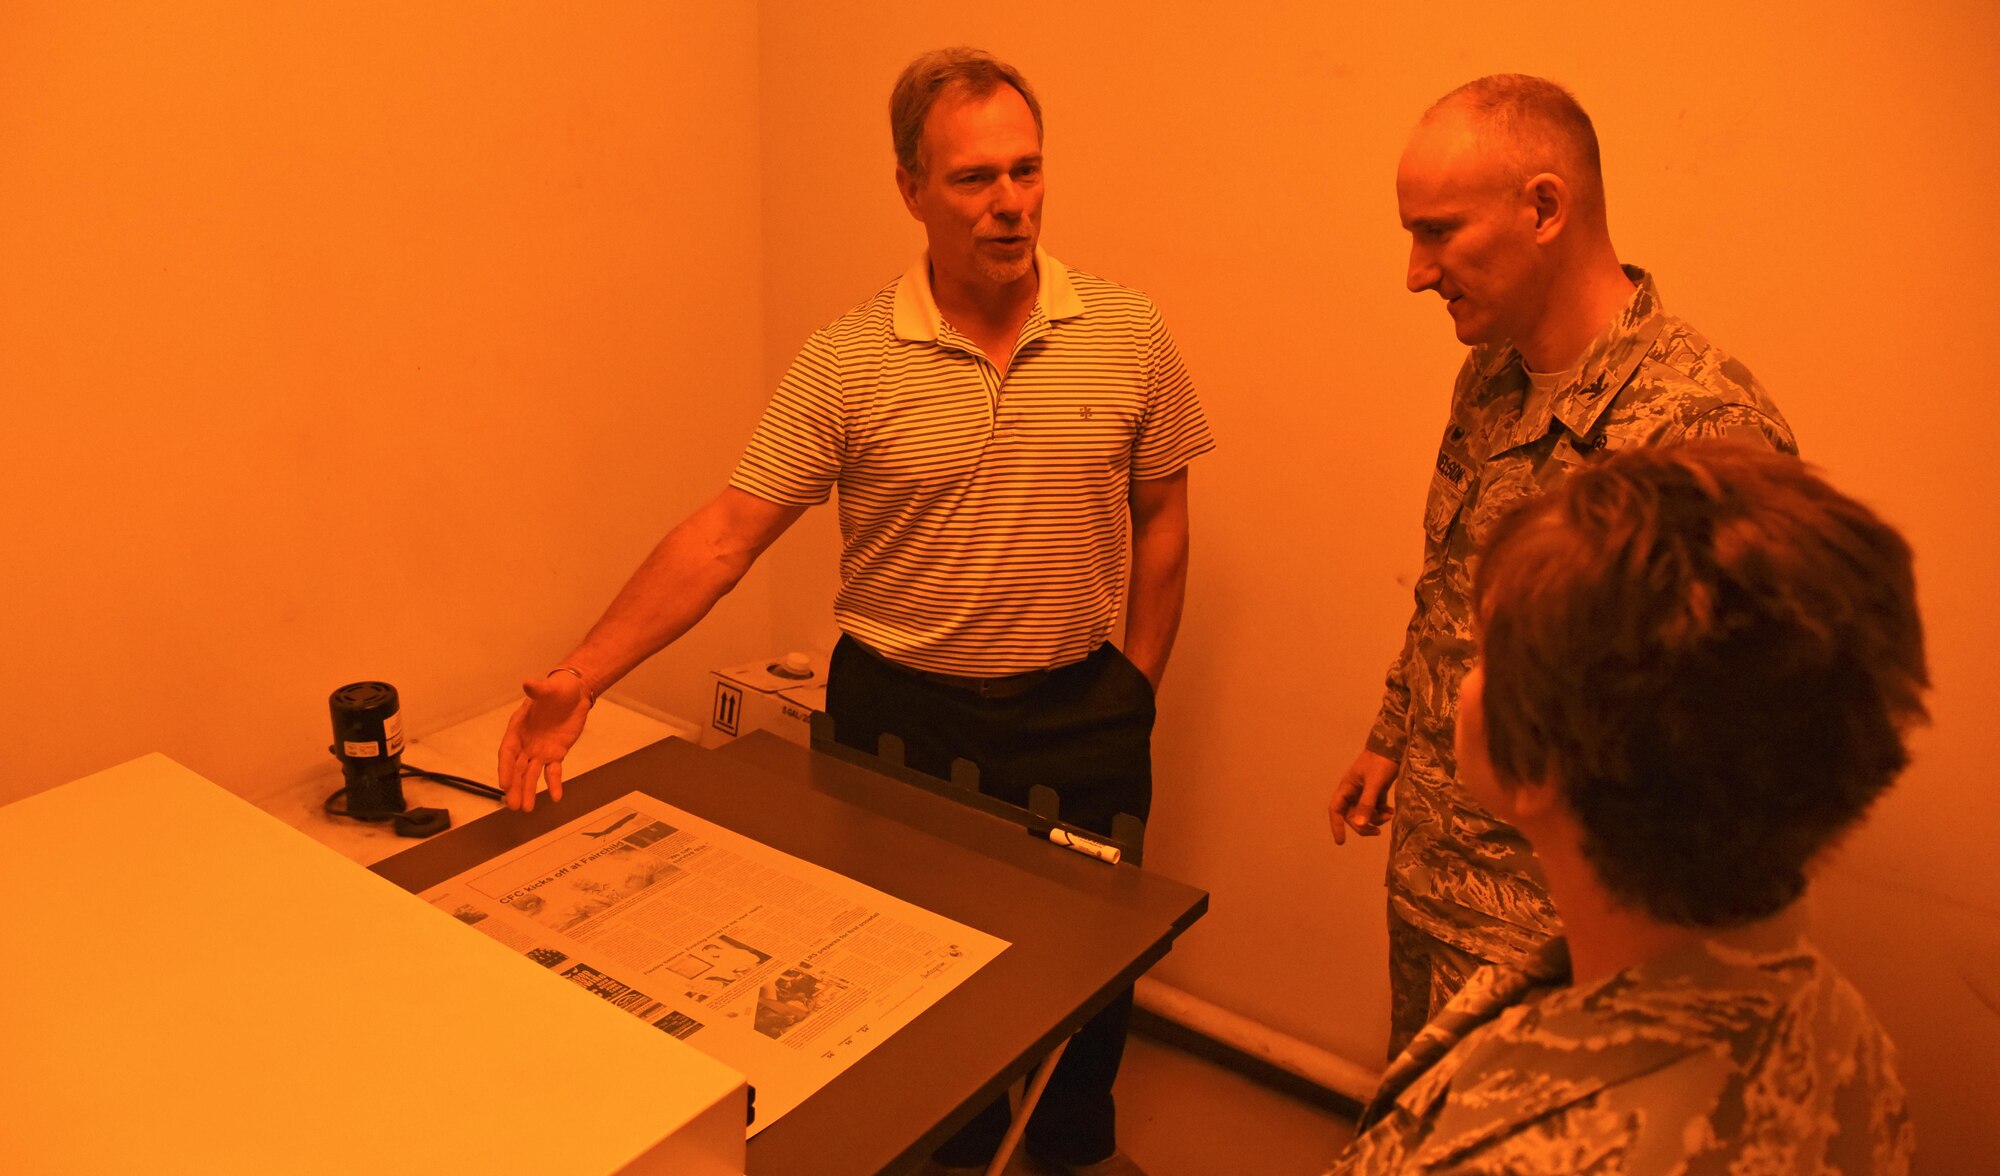 Harlan Shellabarger, Cheney Free Press publisher, shows Col. Ryan Samuelson, 92nd Air Refueling Wing commander, and Chief Master Sgt. Shannon Rix, 92nd ARW command chief, the inside of the CFP dark room Oct. 13, 2016, at Cheney. The dark room is essential to creating the printing plates for the Fairchild Flyer. Each plate is produced to apply a designated color to the newsprint: black, cyan, magenta or yellow. (U.S. Air Force photo/Senior Airman Mackenzie Richardson)